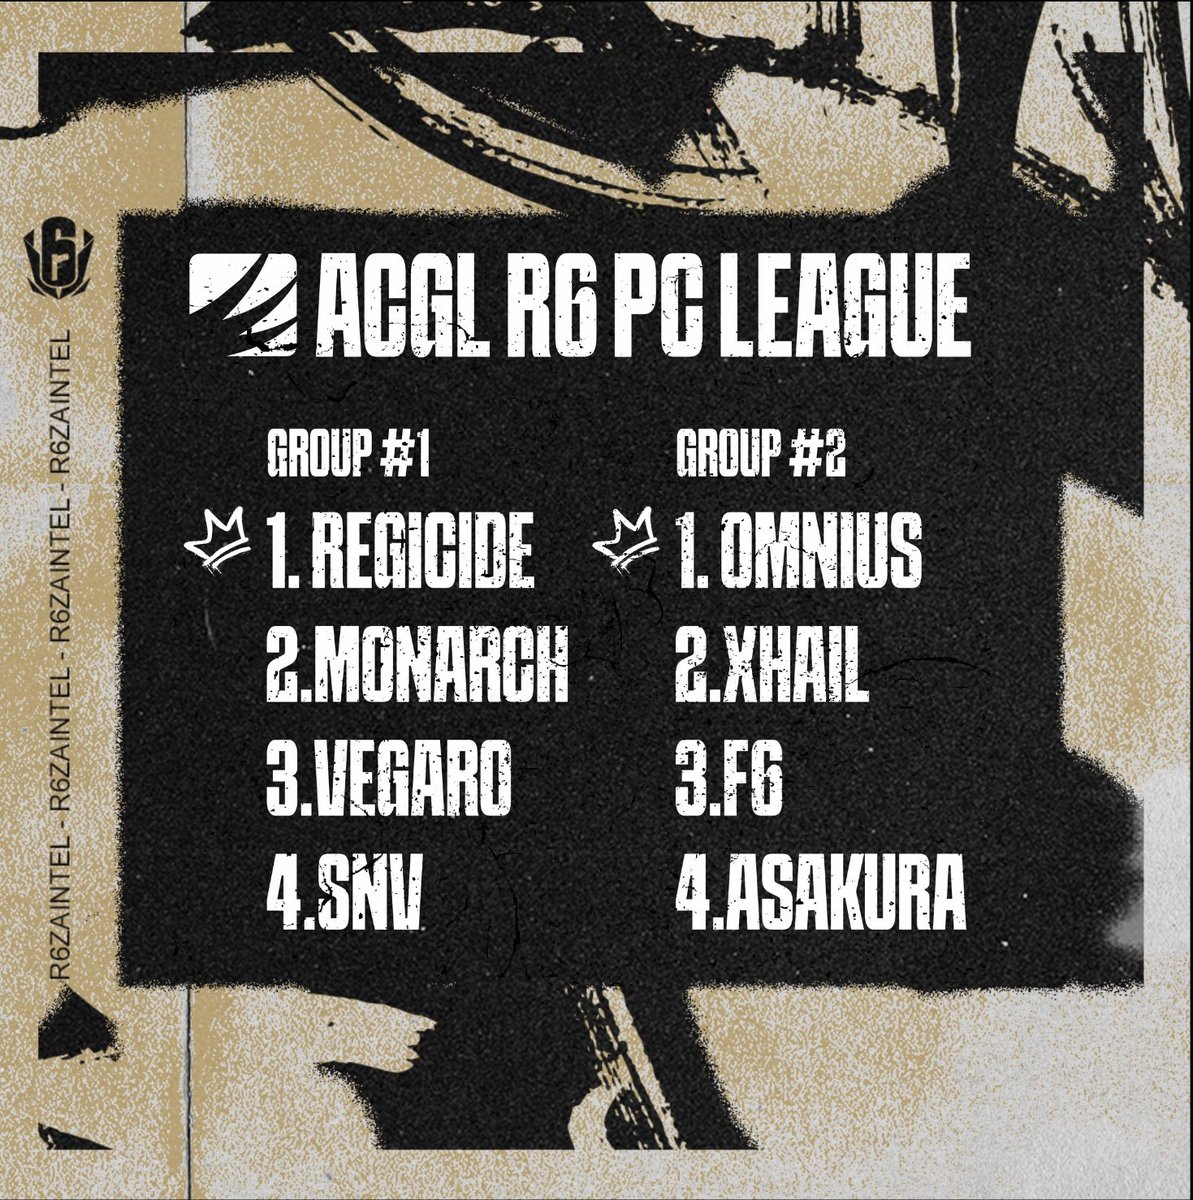 Your @AfricanGaming R6 PC League Top 4 as it stands. partnered with @vKixey 🔵⚪️ It's taking shape as we close off R2 GL #R6ZA Find detailed standings here ➡️ acgl.gg/r6gl/t/116234